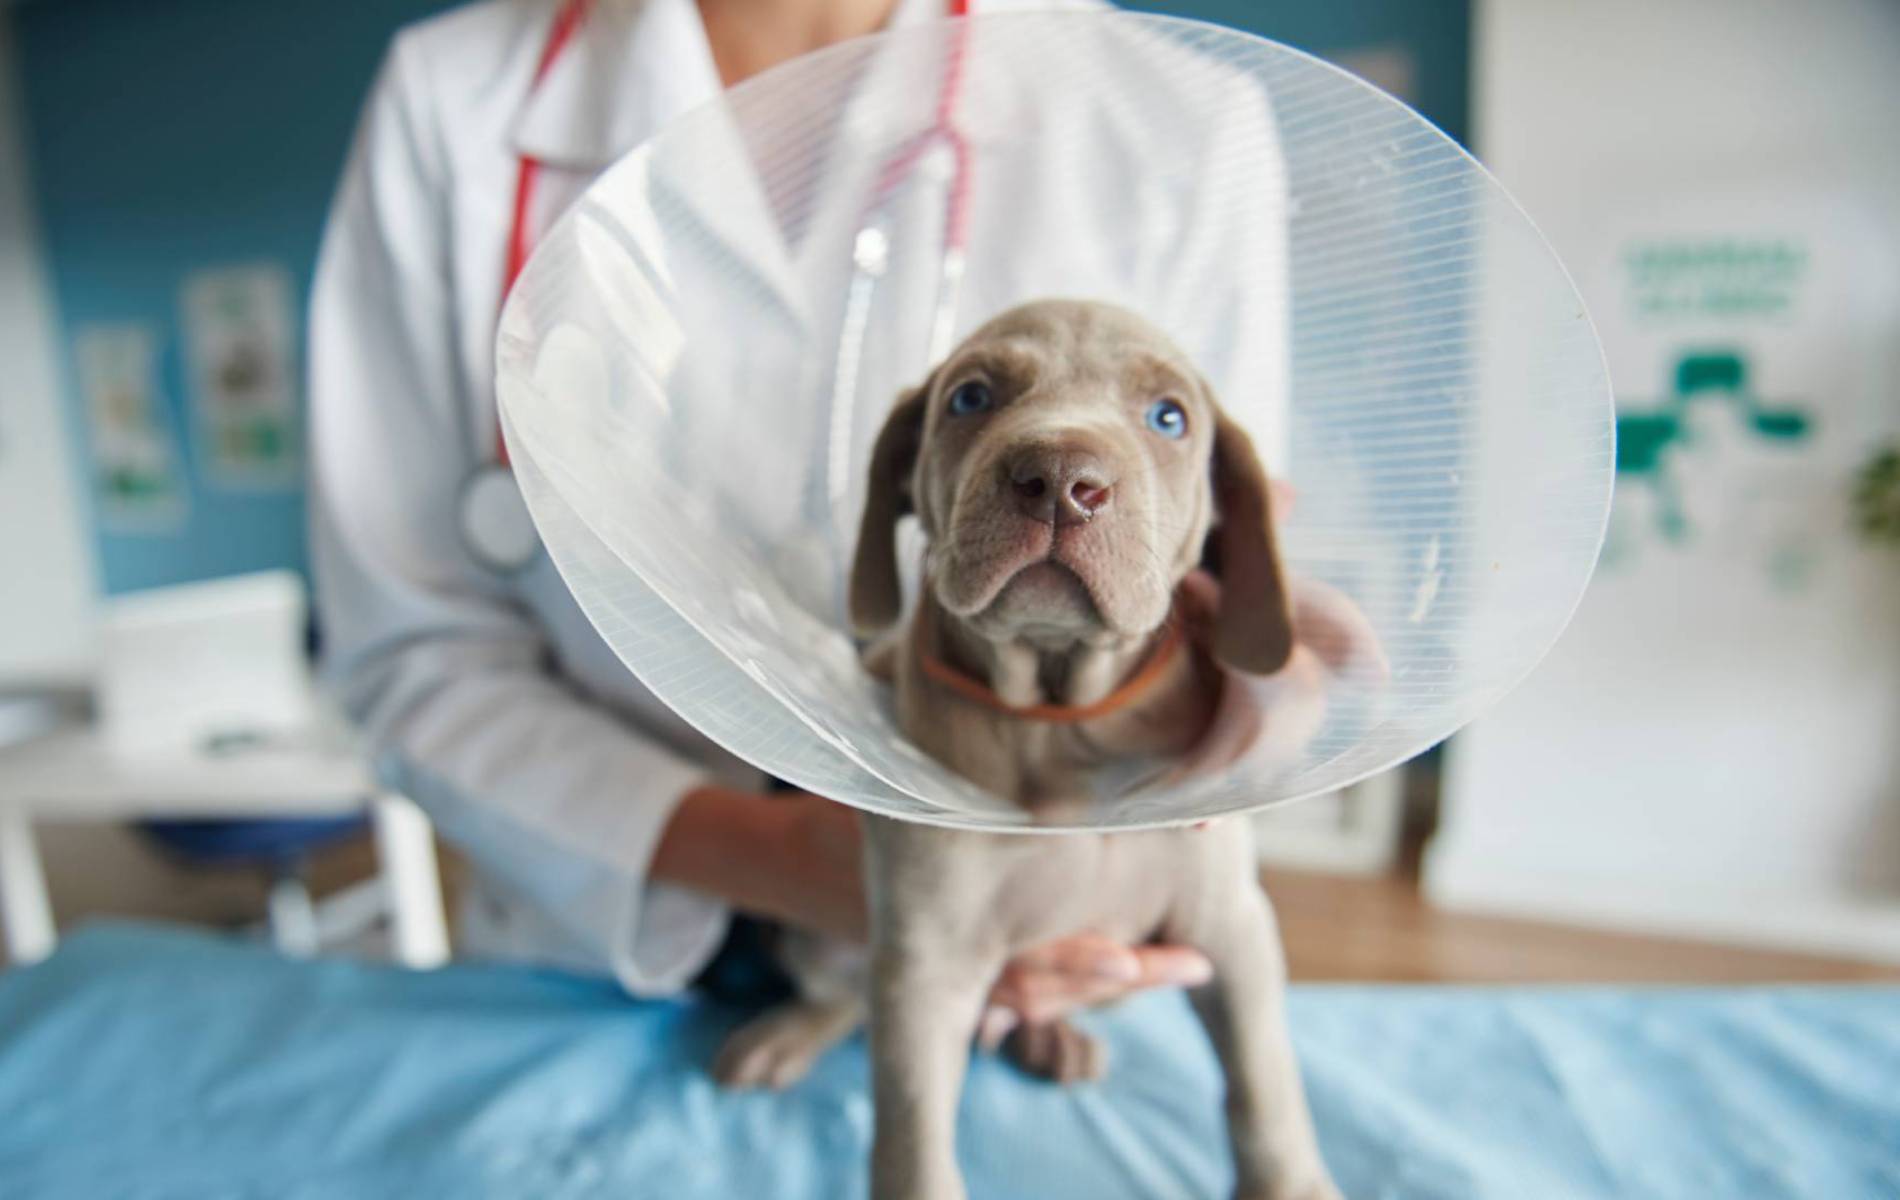 A dog wearing a cone around its neck